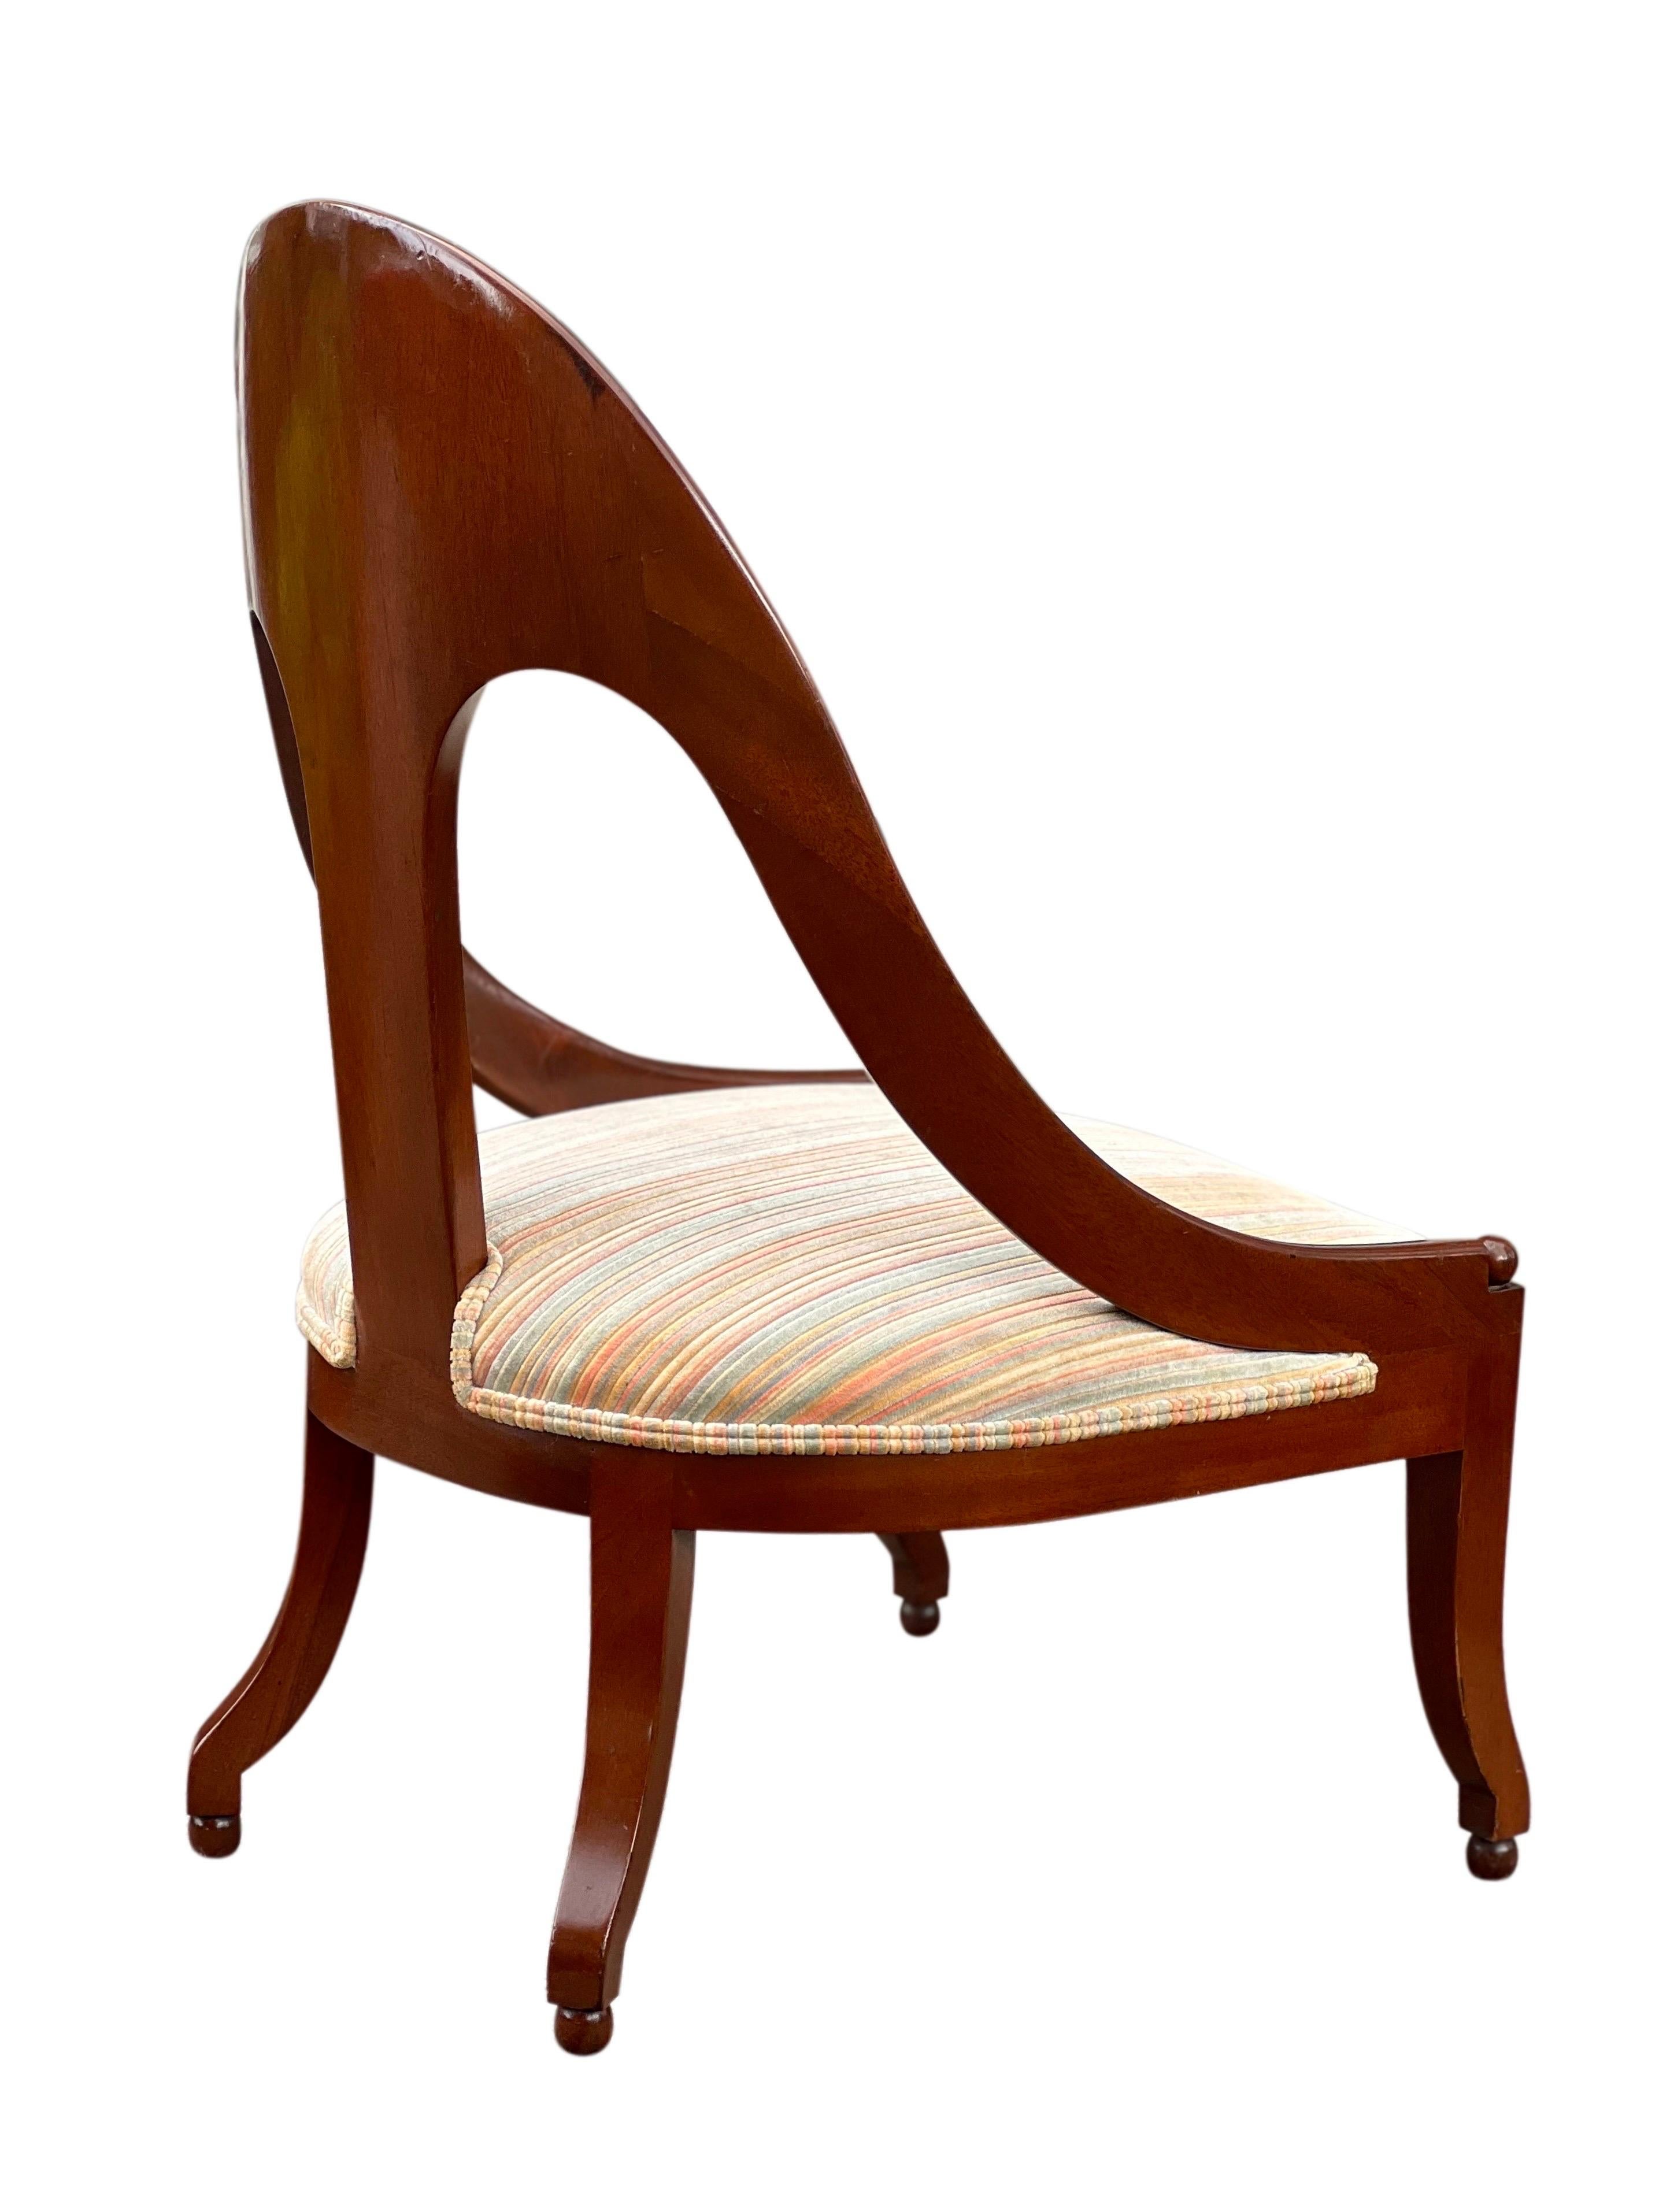 Mid Century Mahogany Slipper Lounge Chair Attributed to Michael Taylor for Baker For Sale 2